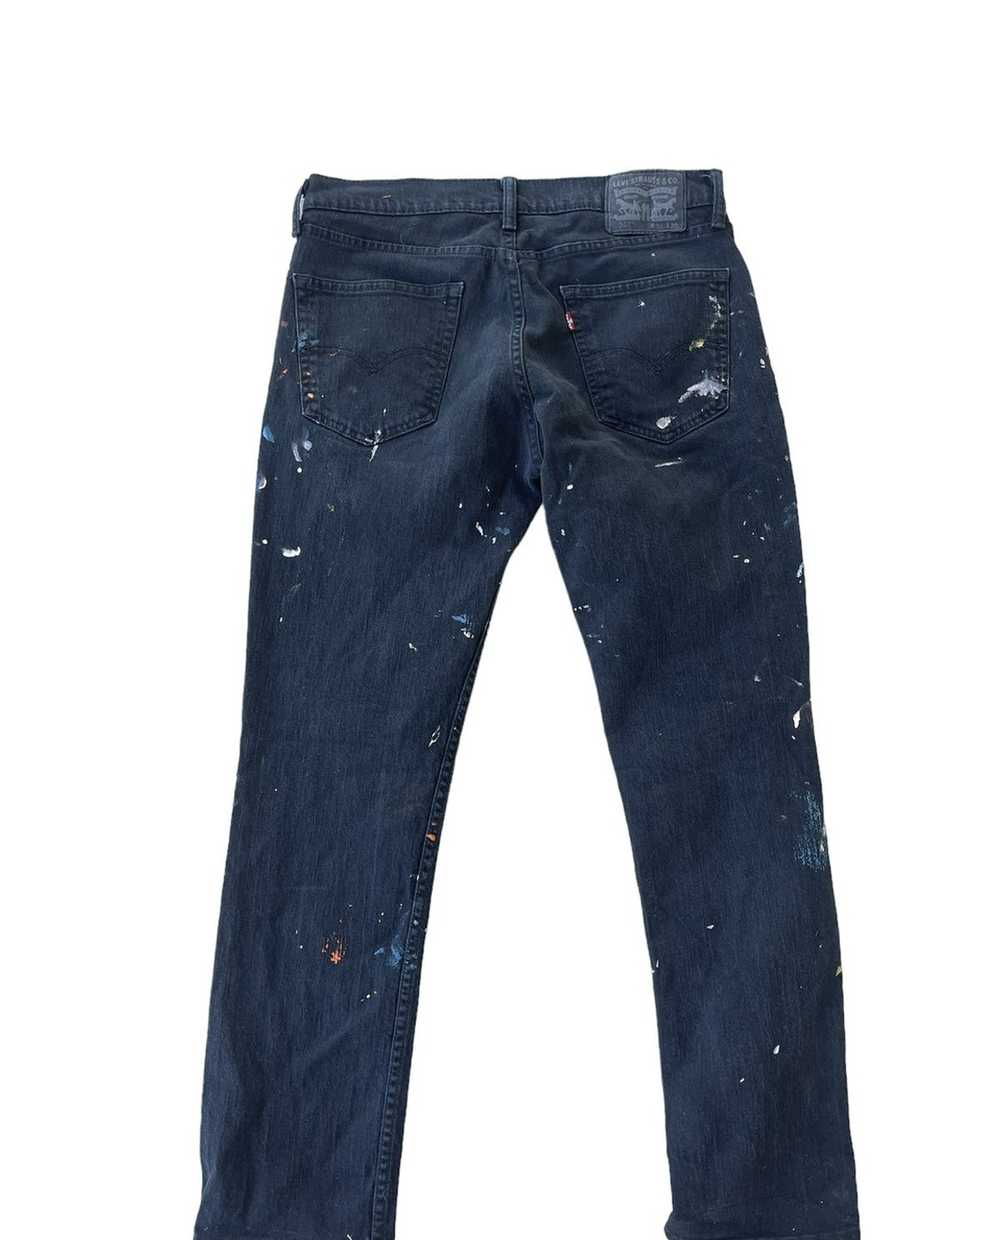 Levi's Levi’s handpainted pants from work. - image 5